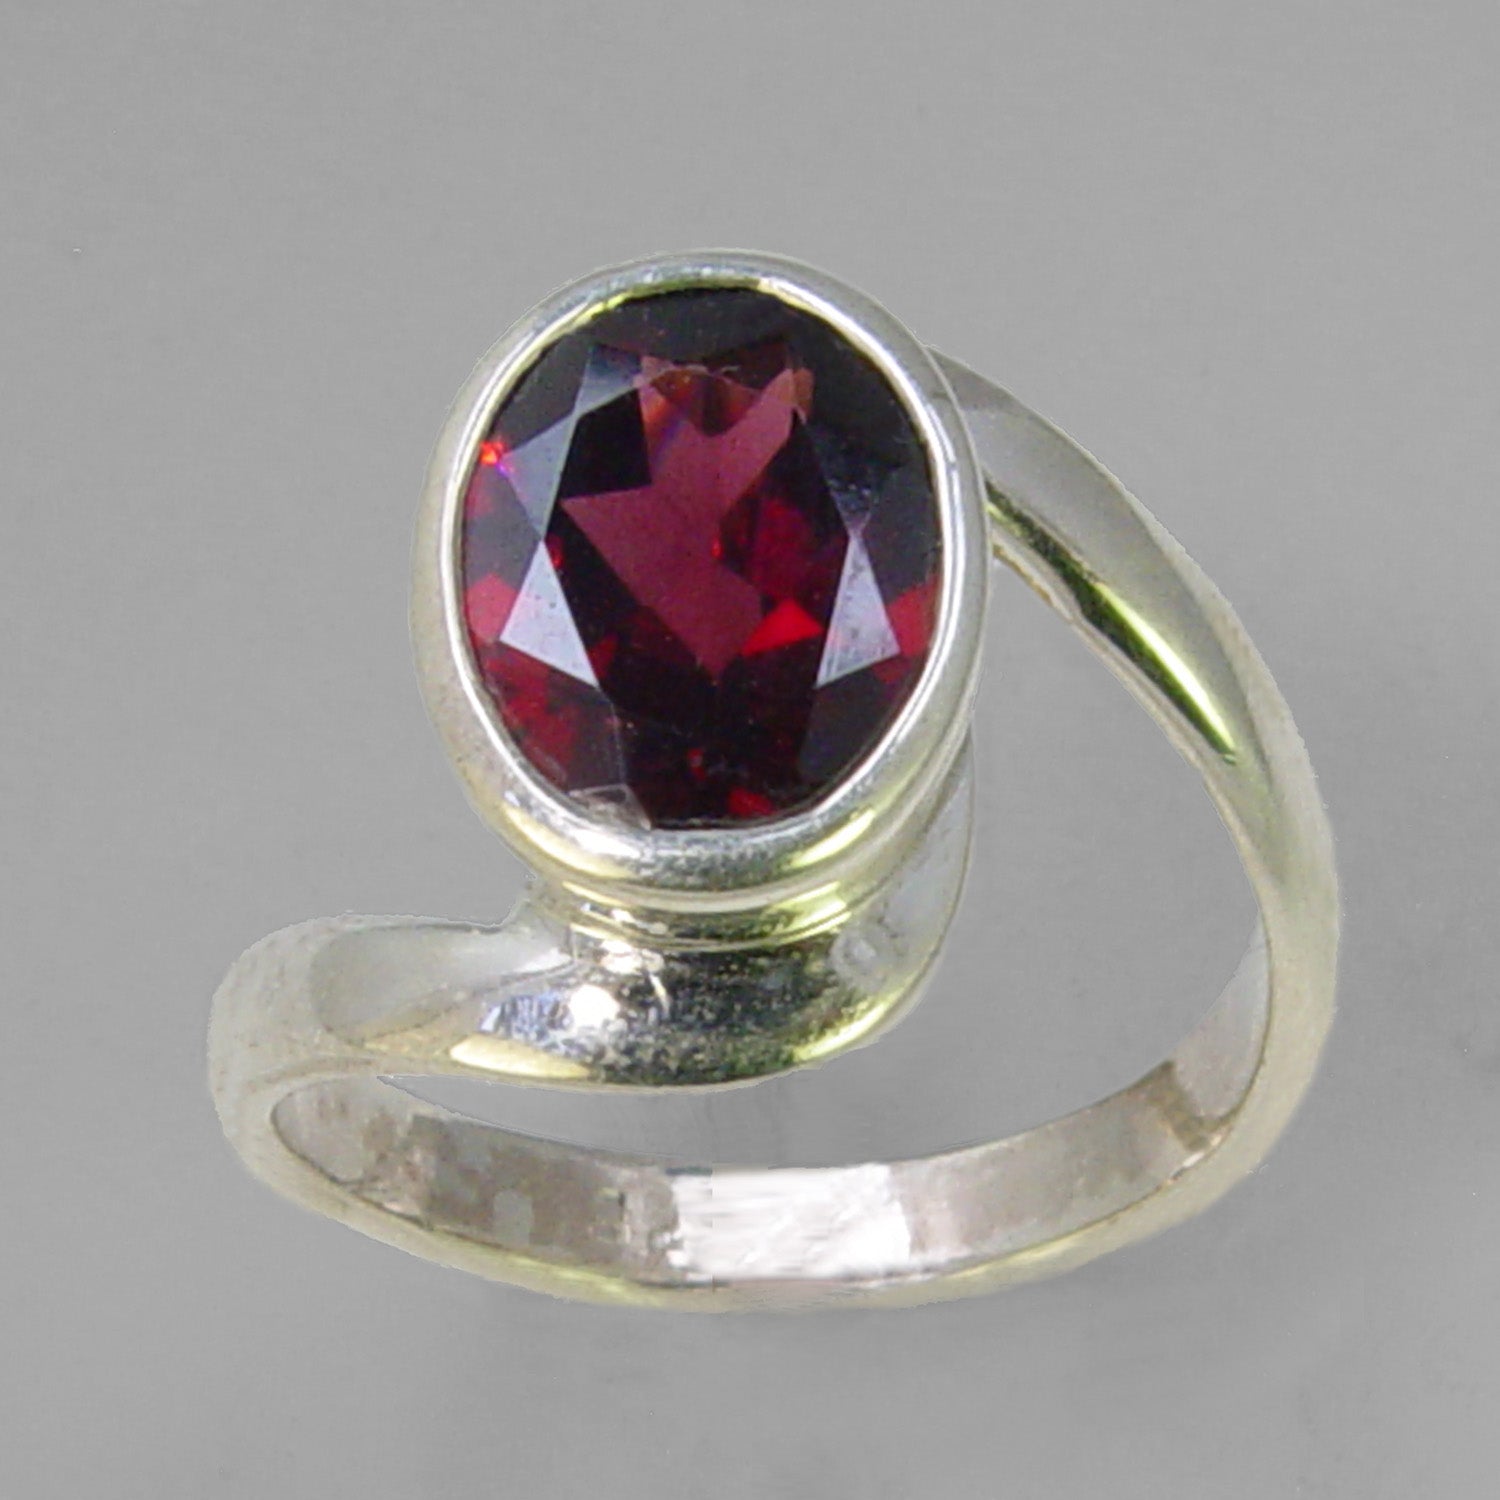 Garnet 3.2 ct Oval Sterling Silver Ring, Size 6.25